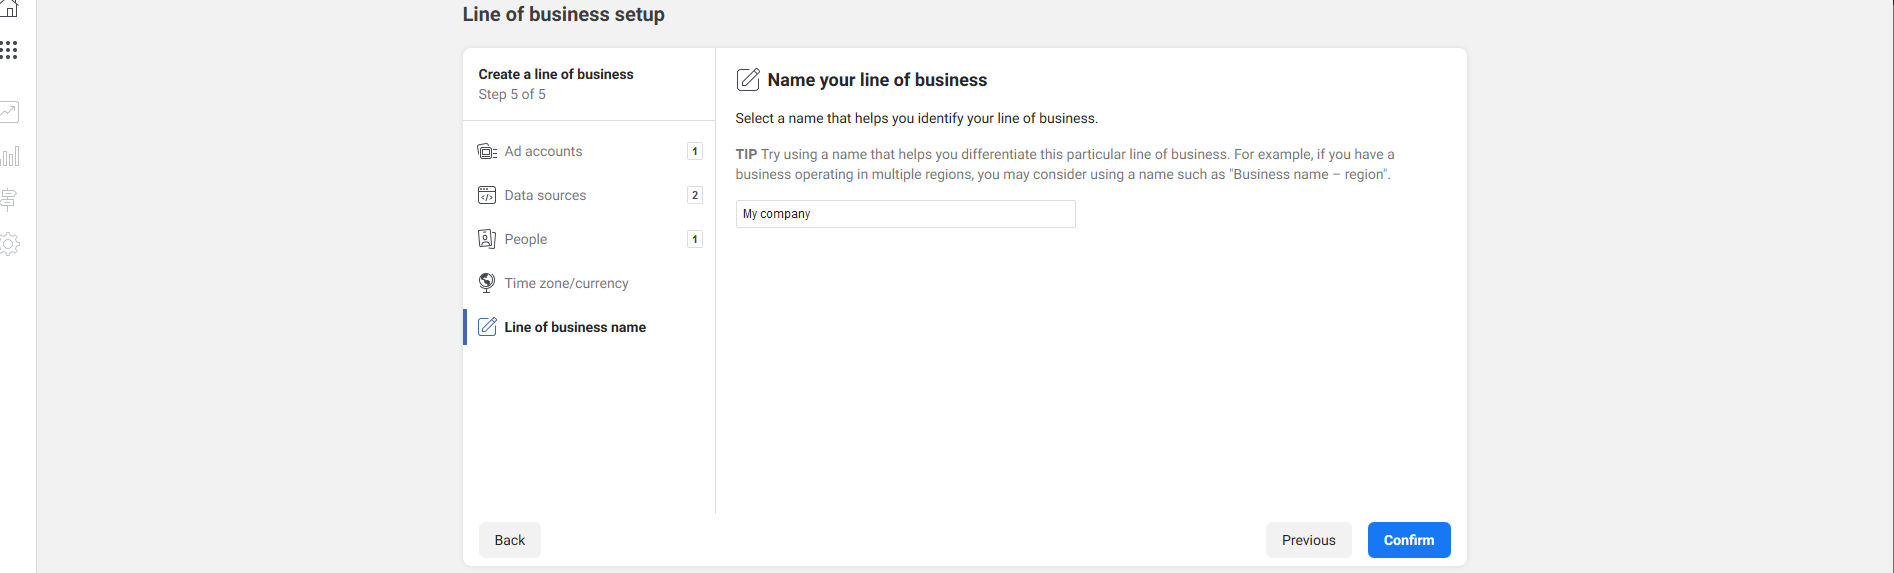 name your ine of business